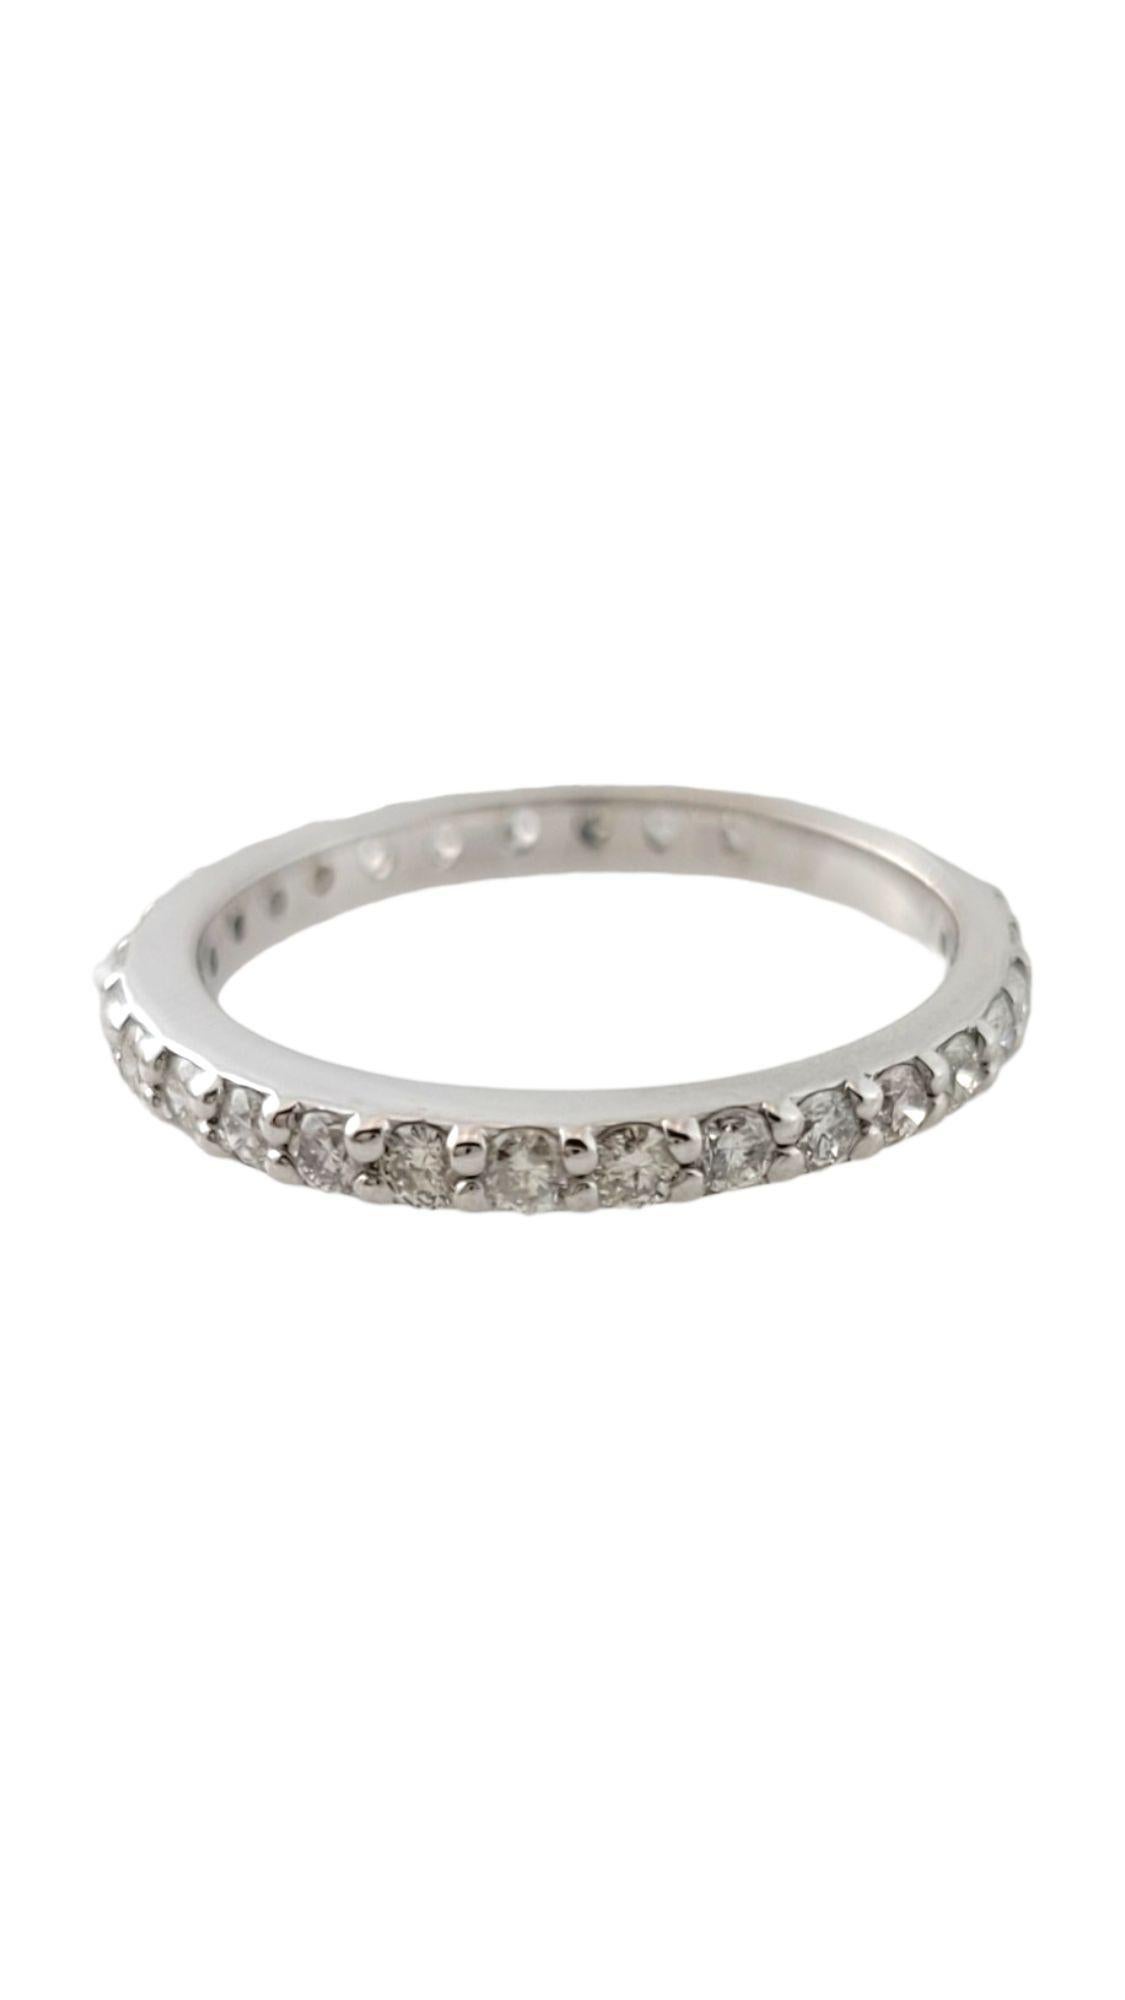 Vintage 14K White Gold Diamond Band Size 5.75

This gorgeous ring has 28 sparkling round brilliant cut diamonds all set in a 14K white gold band!

Approximate total diamond weight: .84 cts

Diamond clarity: SI1-I1

Diamond color: H-I

Ring size: